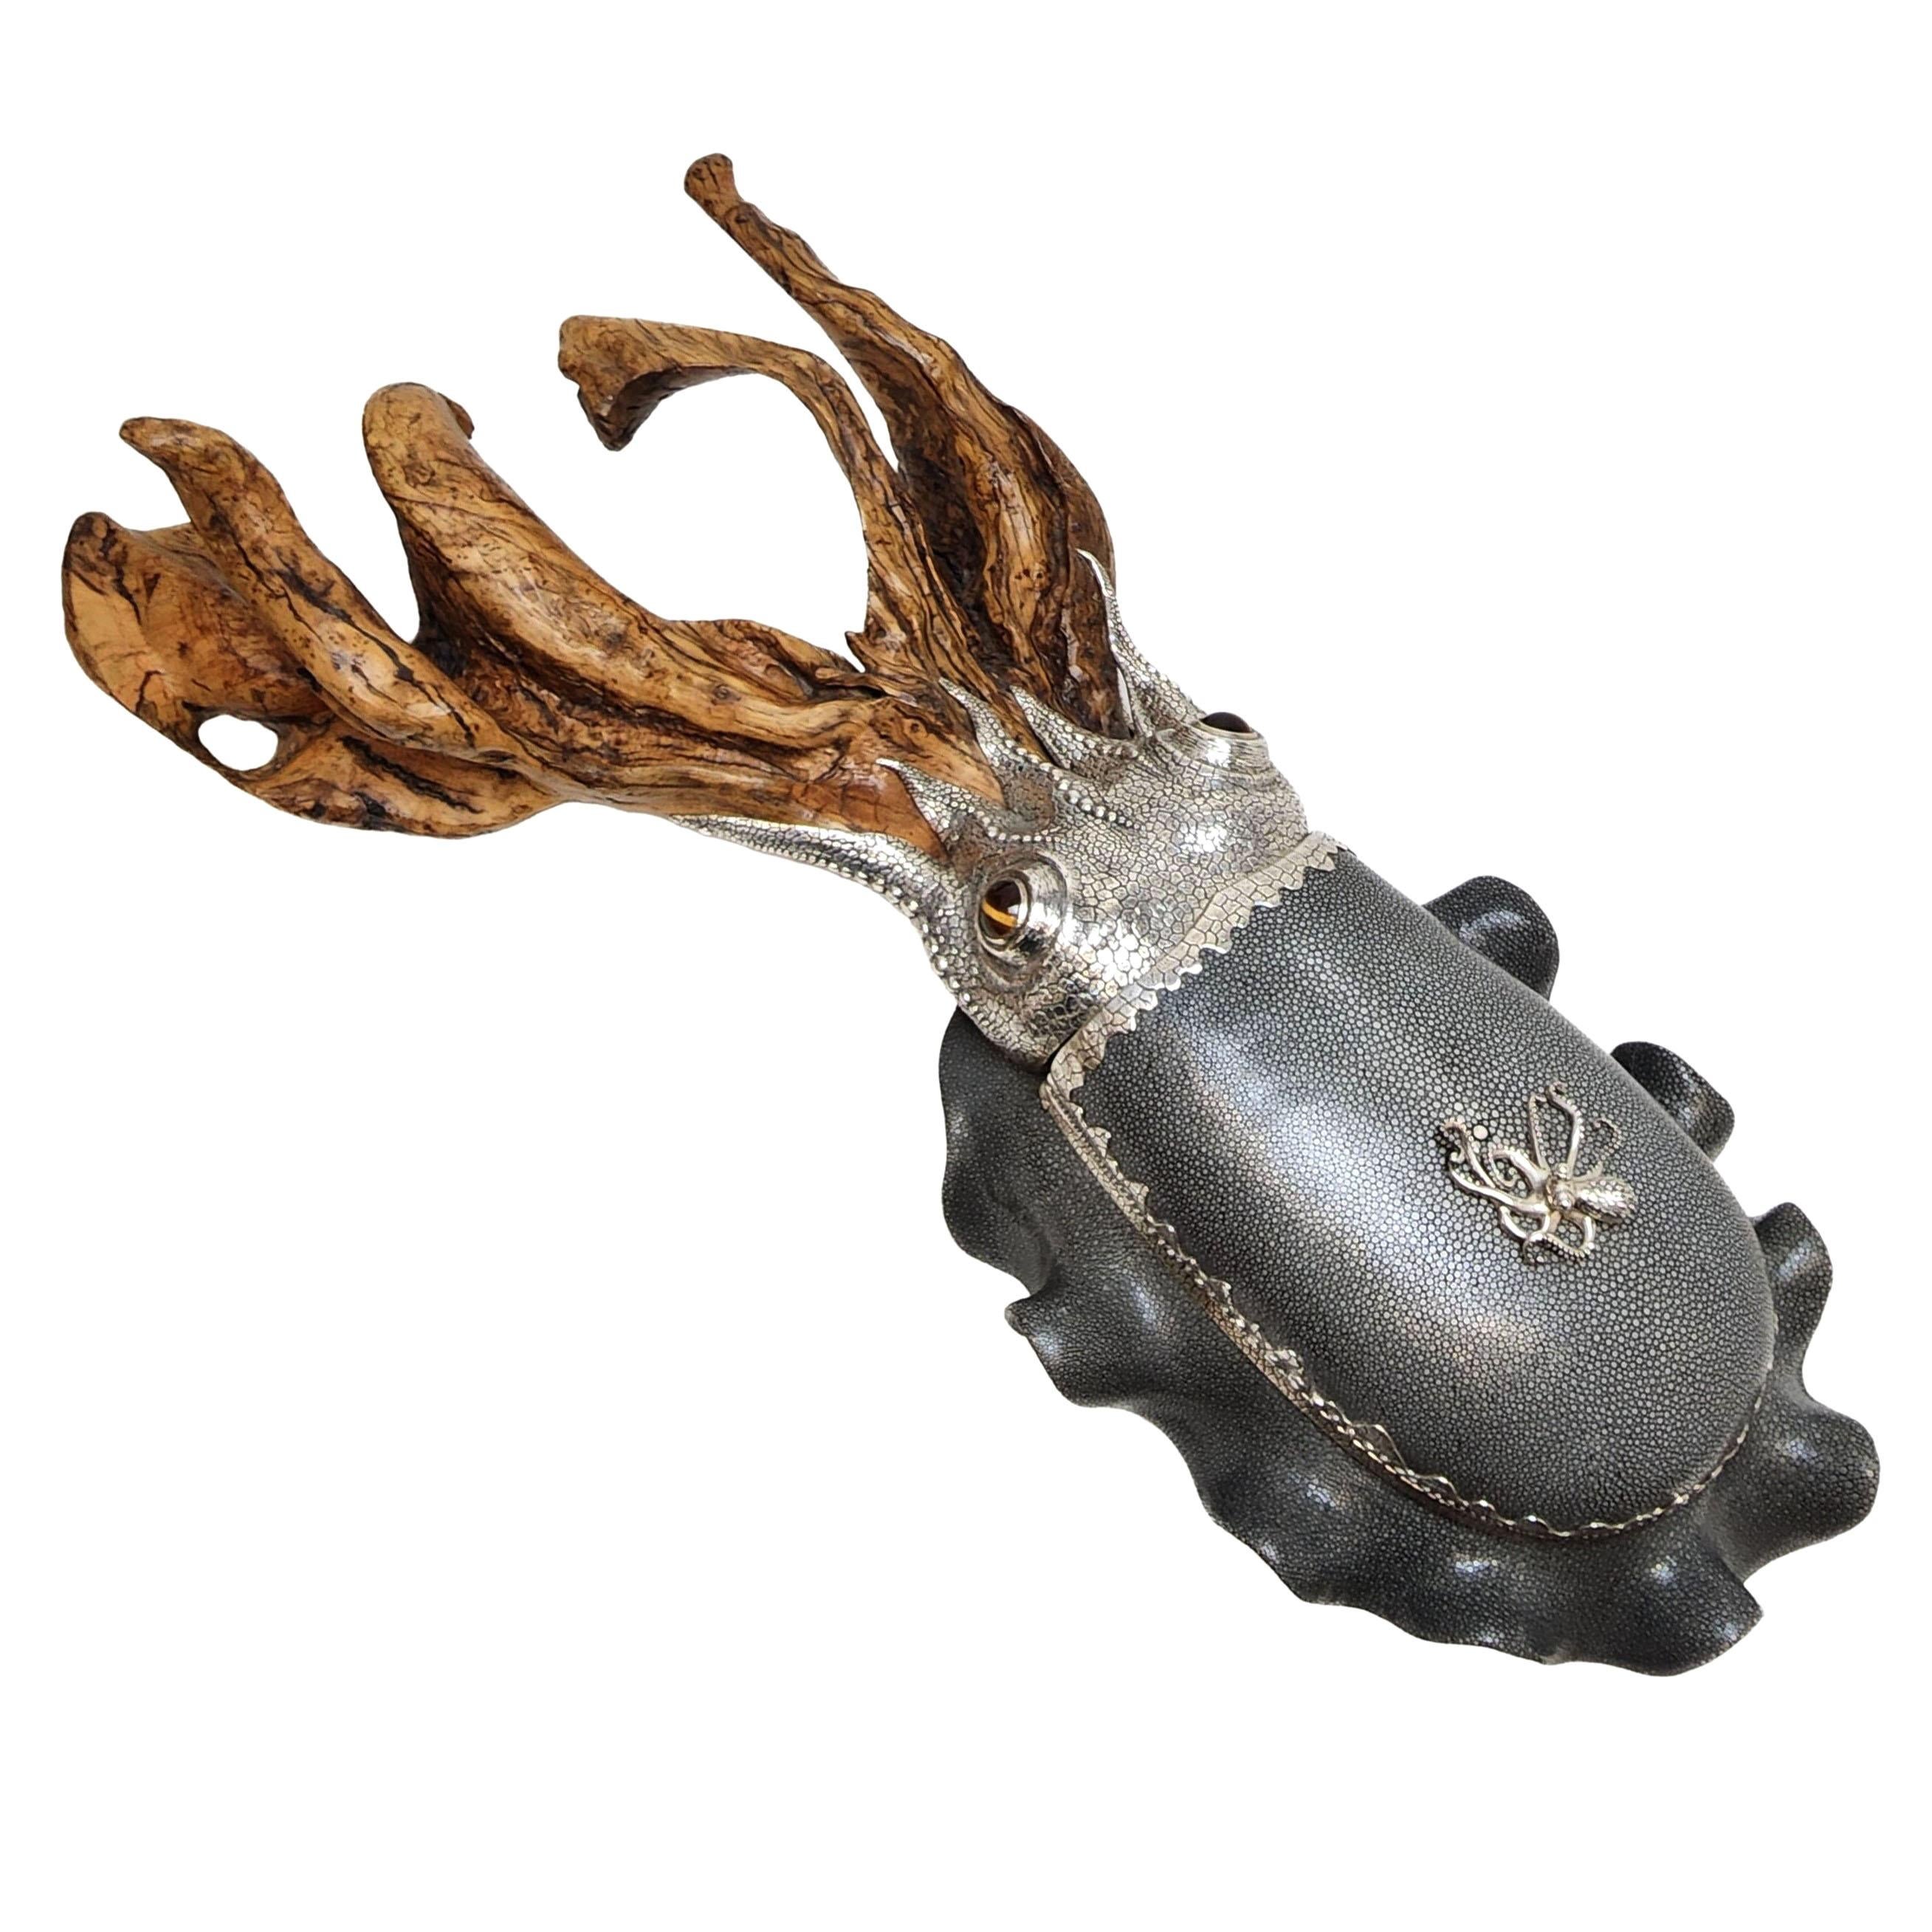 A magnificent and unique Cuttlefish Sculptural Centrepiece made from Silver, Shagreen and Wood. The Cuttlefish has a green shagreen body mounted wish a silver head and embellished with a silver band around the body. The Shagreen Body features a